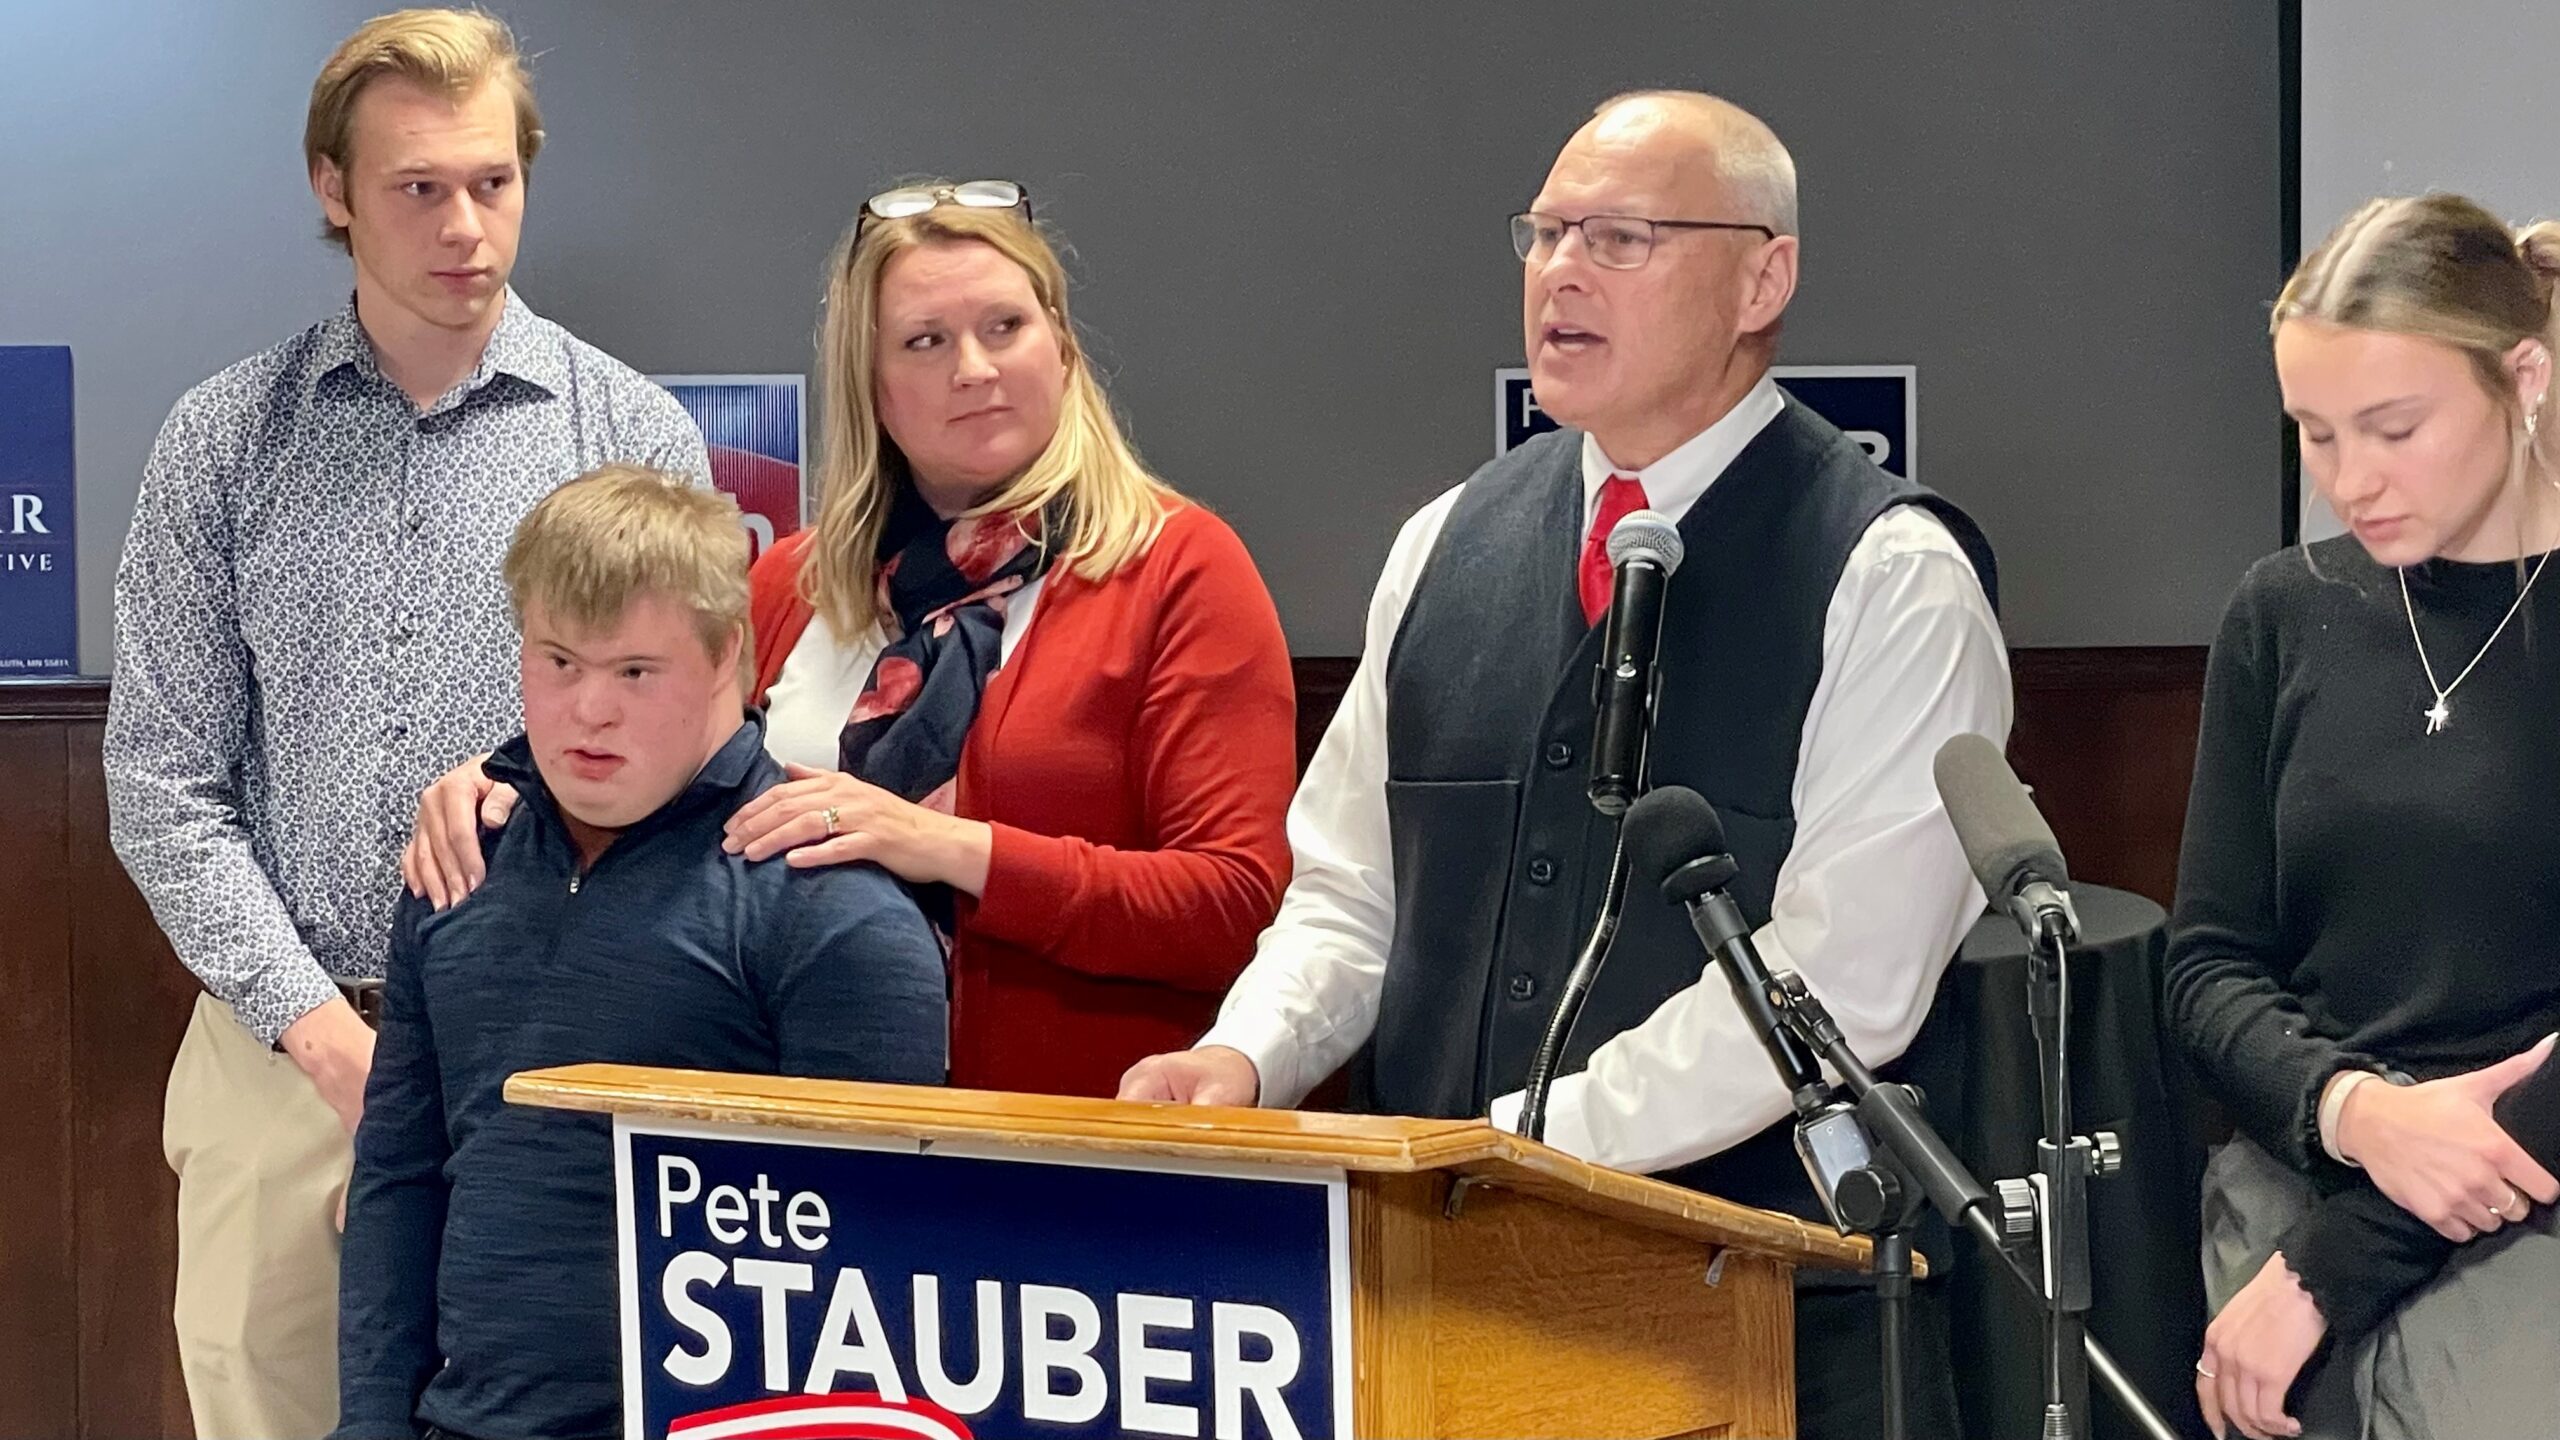 Rep. Stauber gives a re-election speech